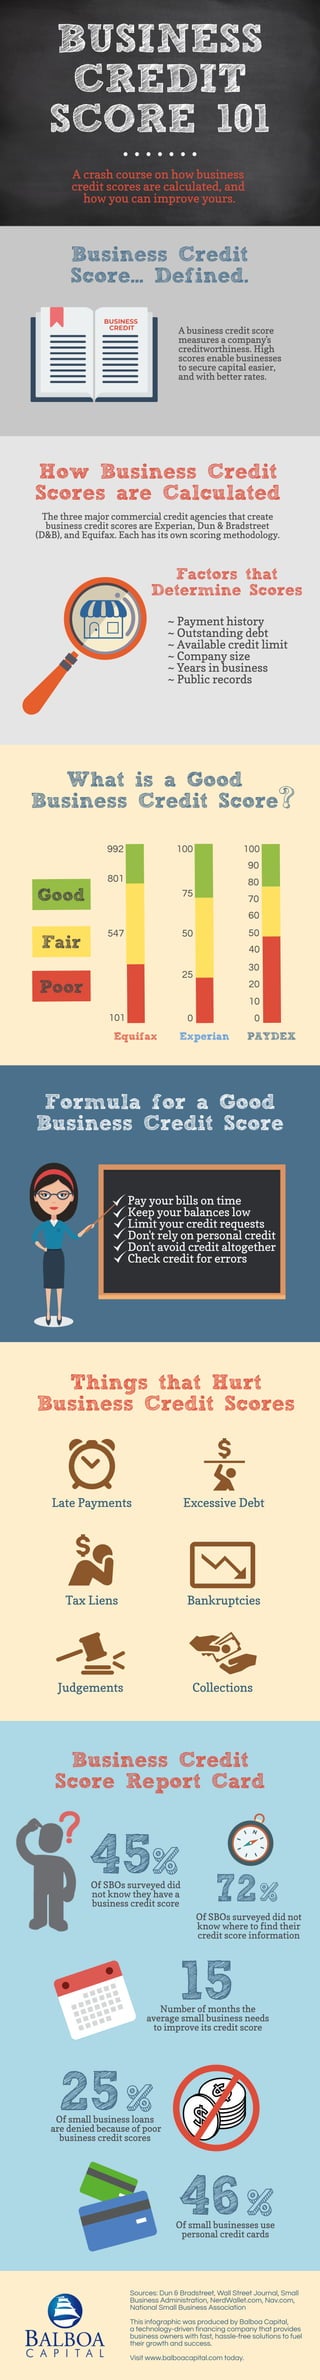 BUSINESS
CREDIT
SCORE 101
A crash course on how business
credit scores are calculated, and
how you can improve yours.
Business Credit
Score... Defined.
A business credit score
measures a company's
creditworthiness. High
scores enable businesses
to secure capital easier,
and with better rates.
BUSINESS
CREDIT
How Business Credit
Scores are Calculated
The three major commercial credit agencies that create
business credit scores are Experian, Dun & Bradstreet
(D&B), and Equifax. Each has its own scoring methodology.
Factors that
Determine Scores
~ Payment history
~ Outstanding debt
~ Available credit limit
~ Company size
~ Years in business
~ Public records
992
101
100
75
50
25
0
547
100
90
60
30
0
80
70
40
20
10
50
PAYDEXExperianEquifax
What is a Good
Business Credit Score
Good
Fair
Poor
801
Formula for a Good
Business Credit Score
Pay your bills on time
Keep your balances low
Limit your credit requests
Don't rely on personal credit
Don't avoid credit altogether
Check credit for errors
Things that Hurt
Business Credit Scores
BankruptciesTax Liens
Judgements Collections
Late Payments Excessive Debt
Business Credit
Score Report Card
15Number of months the
average small business needs
to improve its credit score
45Of SBOs surveyed did
not know they have a
business credit score
25Of small business loans
 are denied because of poor
business credit scores
72Of SBOs surveyed did not
know where to find their
credit score information
46Of small businesses use
personal credit cards
Sources: Dun & Bradstreet, Wall Street Journal, Small
Business Administration, NerdWallet.com, Nav.com,
National Small Business Association
This infographic was produced by Balboa Capital,
a technology-driven financing company that provides
business owners with fast, hassle-free solutions to fuel
their growth and success.
Visit www.balboacapital.com today.
 